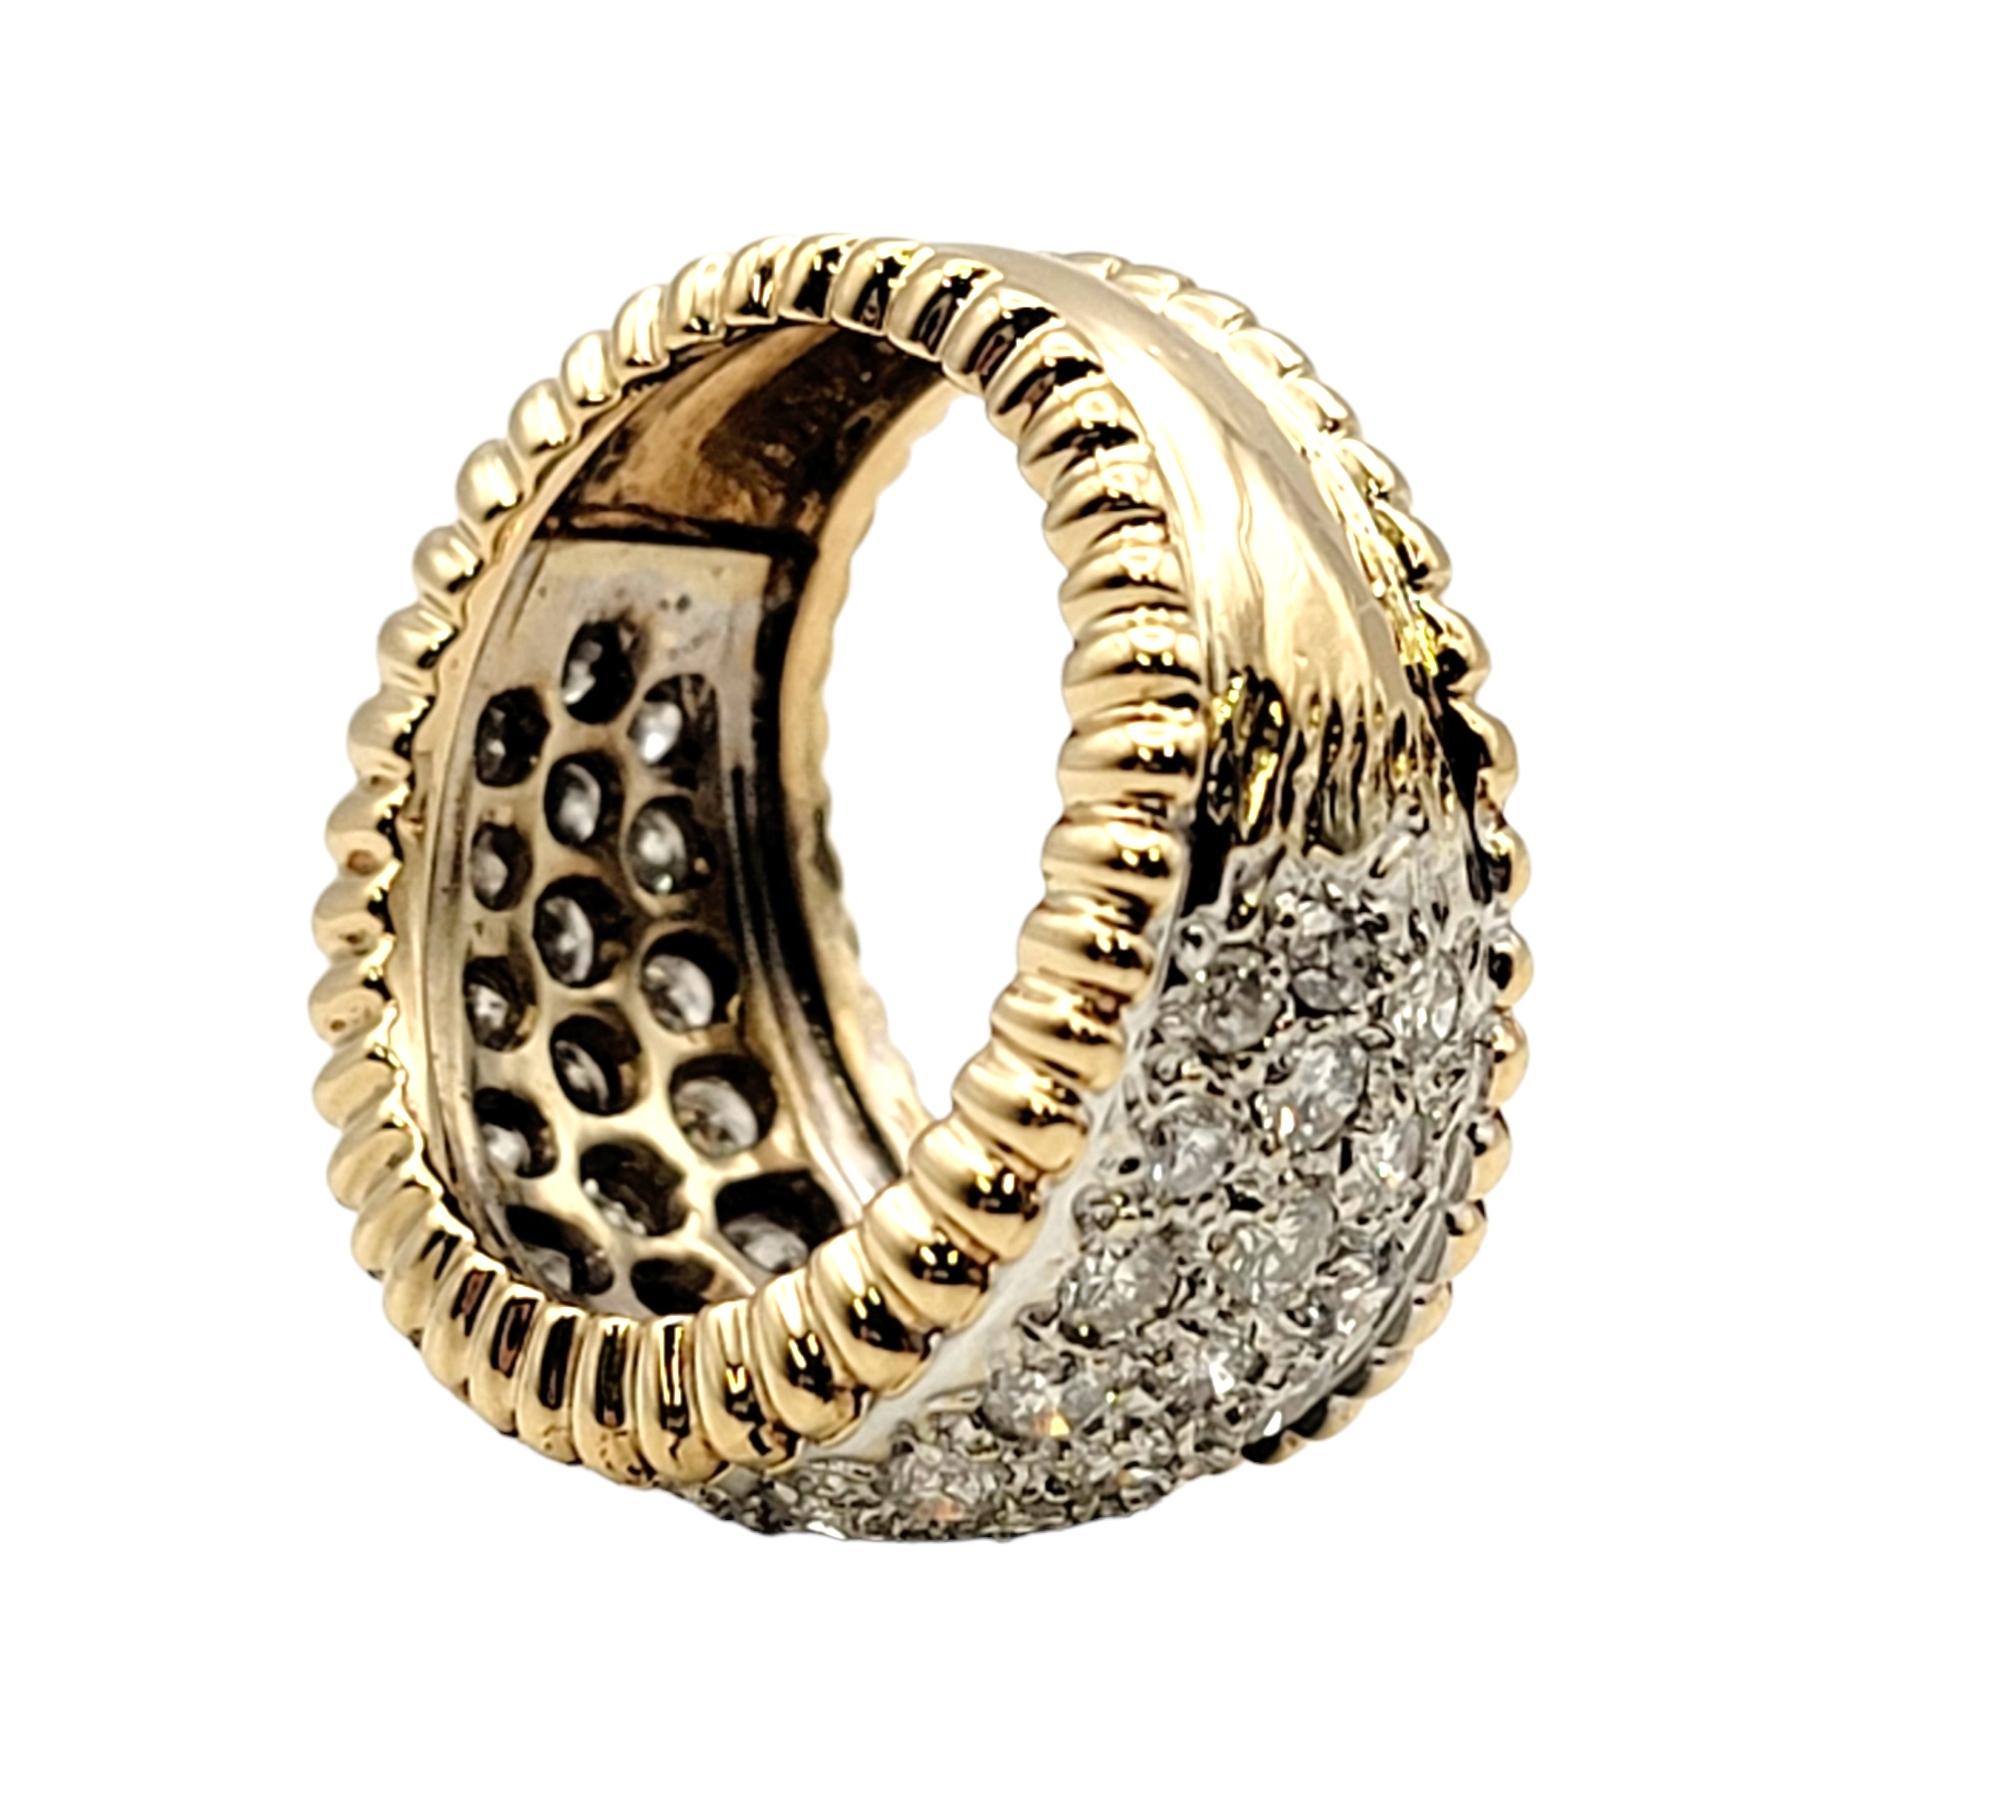 1.55 Carat Total Multi-Row Pave Diamond Wide Band Ring in Two Tone 14 Karat Gold In Good Condition For Sale In Scottsdale, AZ